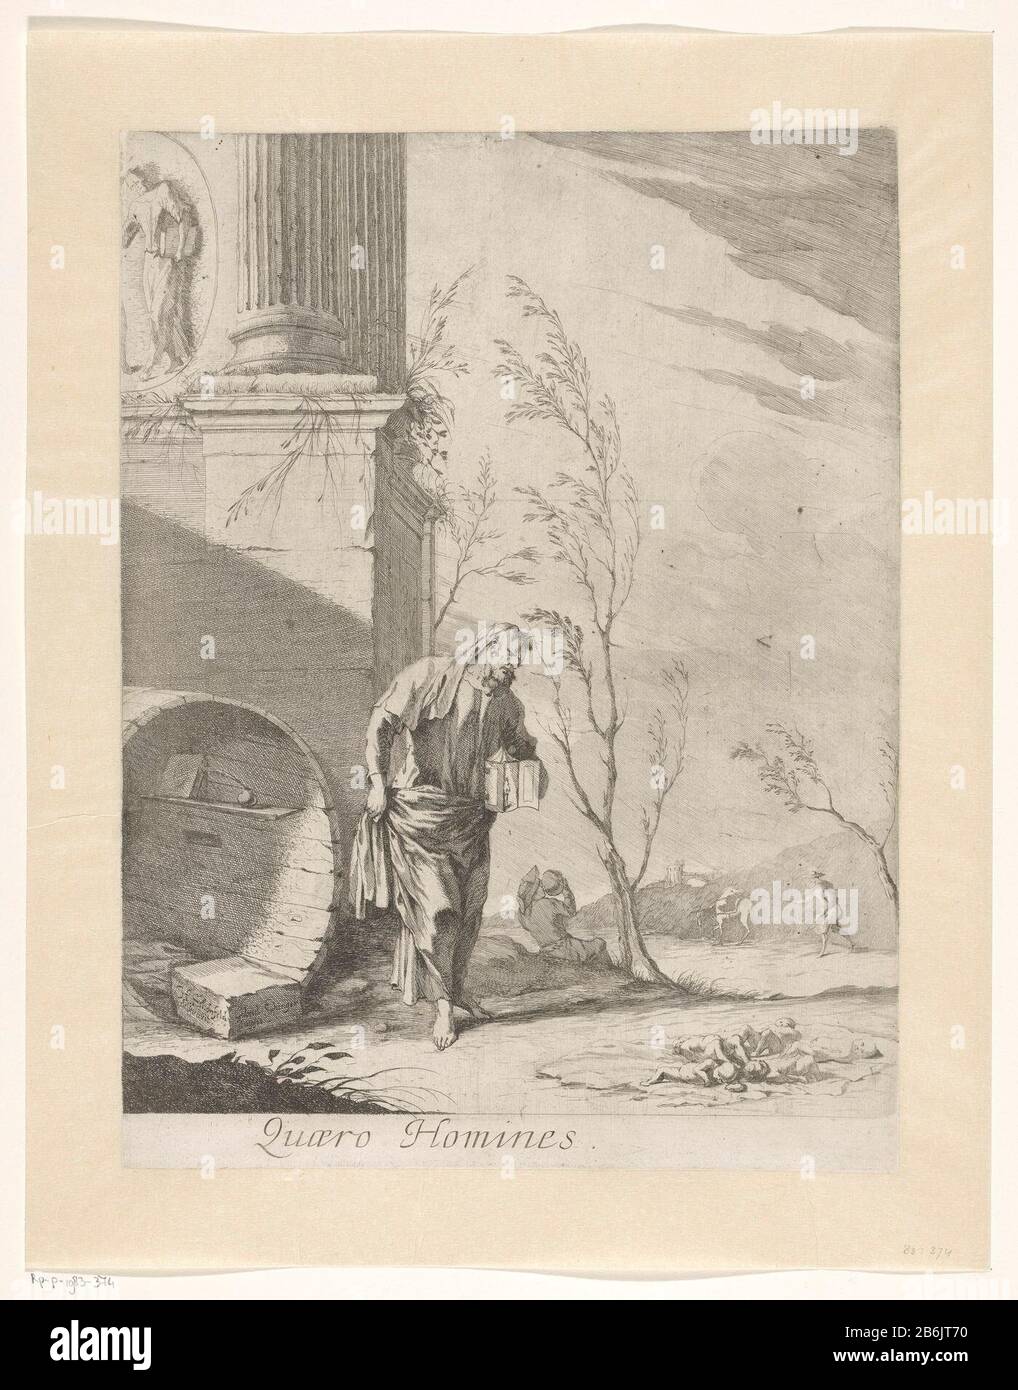 Diogenes seeking to (titel op object) Diogenes with lantern in hand for the ton Where: he lives in. For right are five dead babies on the ground. Possibly as a symbol of his fruitless search for the onschuld. Manufacturer : printmaker Gabriel Ehinger (listed building), designed by Johann Heinrich Schönfeld (listed building) Dated: 1662 - 1736 Material: paper Technique: etching Dimensions: sheet: H 411 mm (cut inner plate edge) × W 308 mm (cut inner plate edge)  Subject: Diogenes, carrying a lighted lantarn by daylight, trying to find an honest man Benthic, usually in a crowded market-place (st Stock Photo